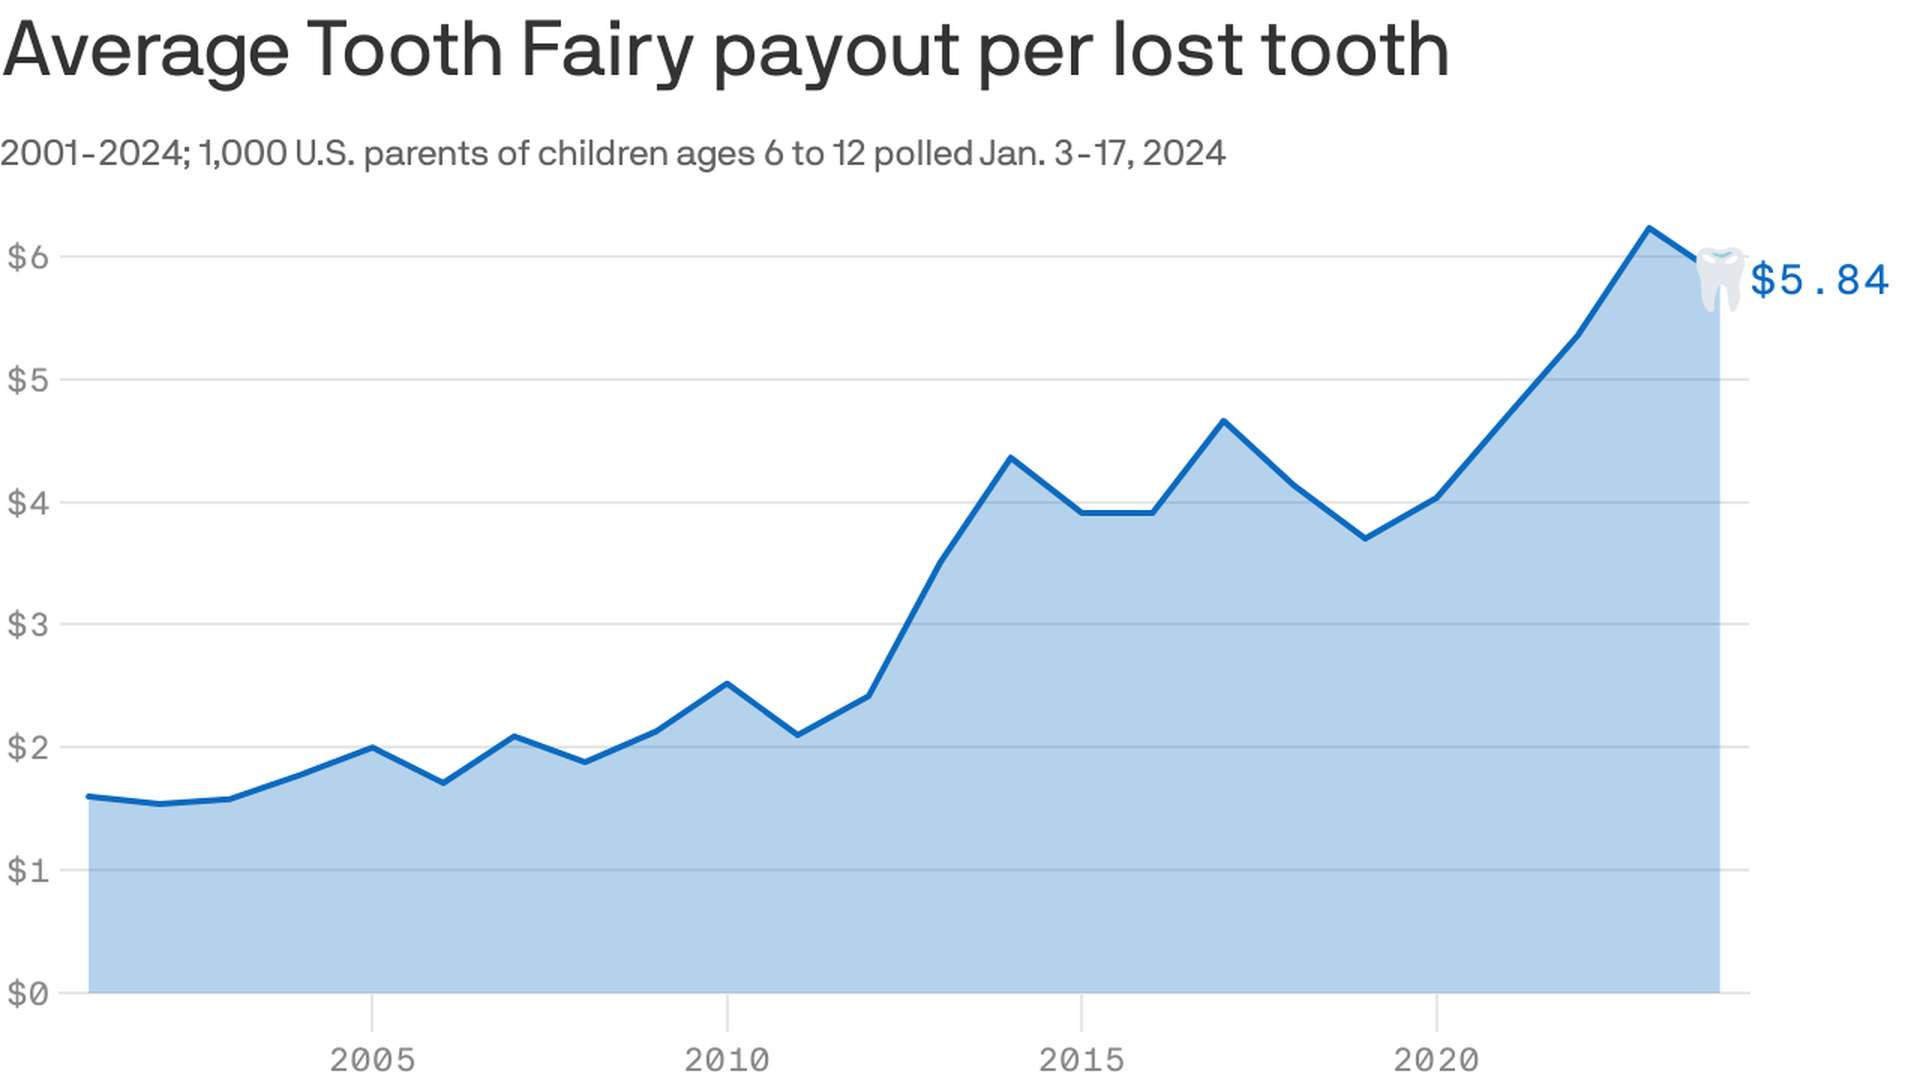 ine chart showing the average amount the Tooth Fairy pays per lost tooth, 2001-2024, according to an annual survey of parents of children 6-12. The line is blue and is shaded transparent blue underneath, showing a range of $1.60 in 2001 up to a high of $6.23 in 2023 and back down to $5.84 in 2024. 